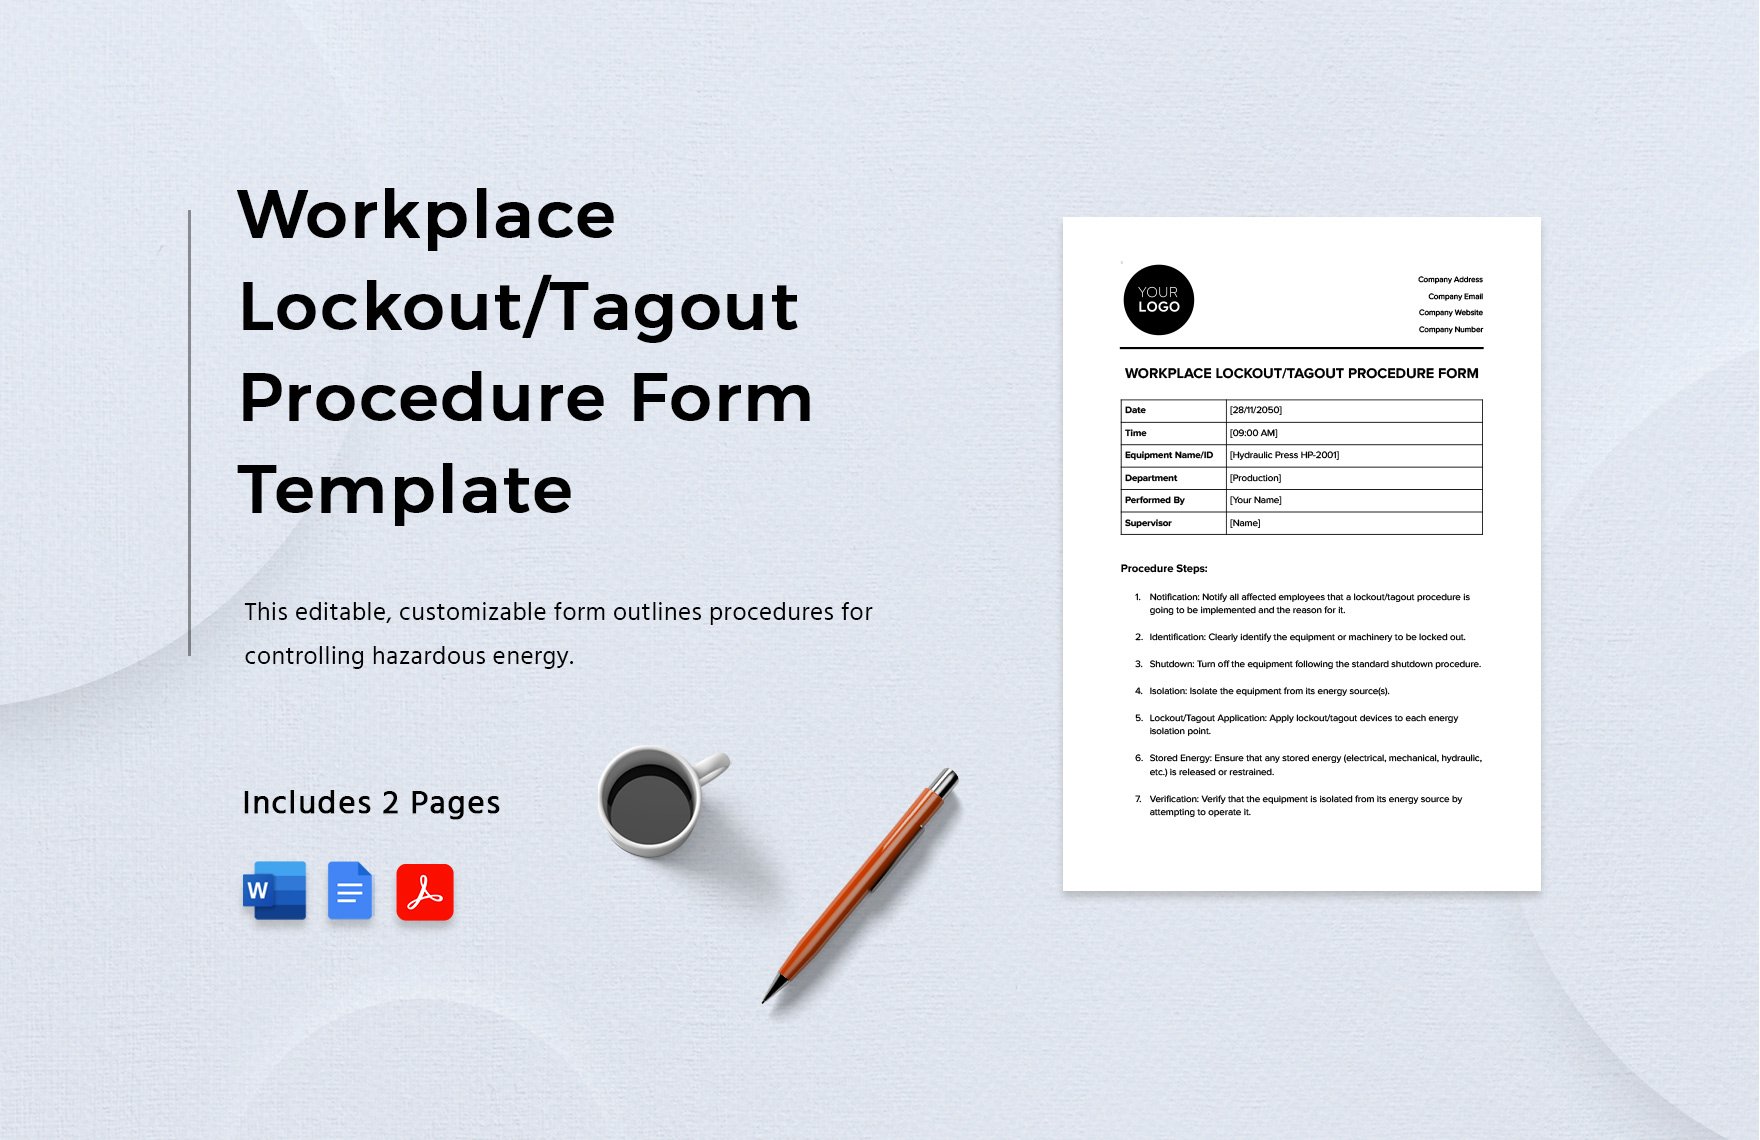 Workplace Lockout/Tagout Procedure Form Template